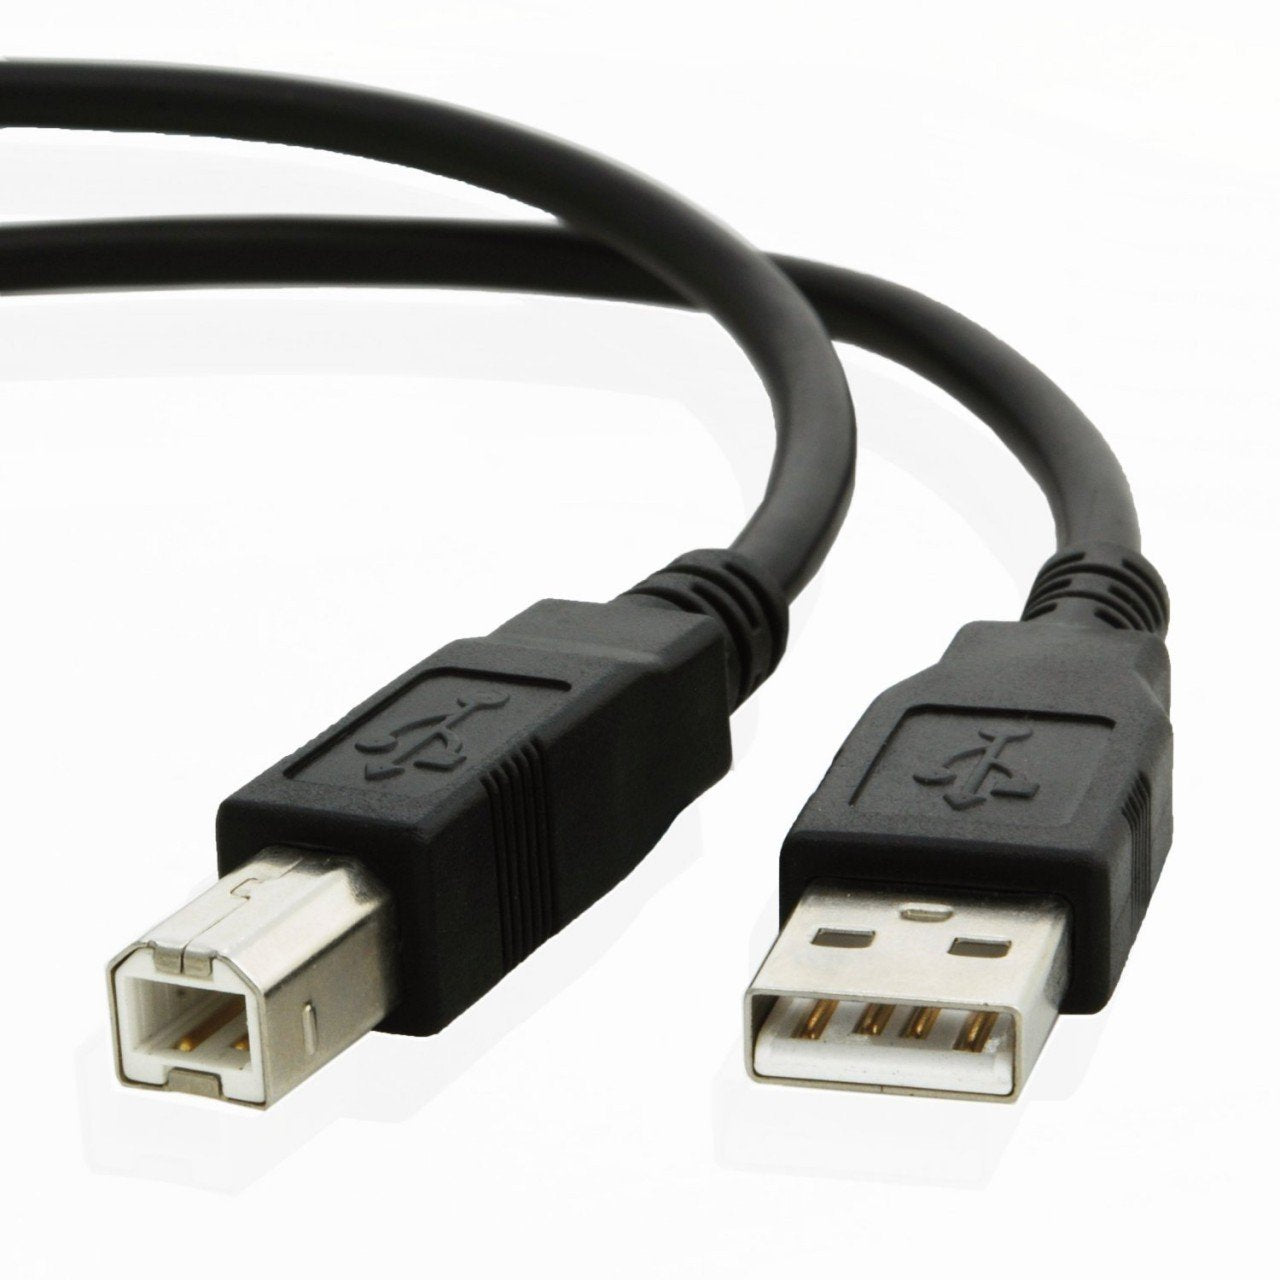 USB cable for Casio DIGITAL PIANO CDP-235